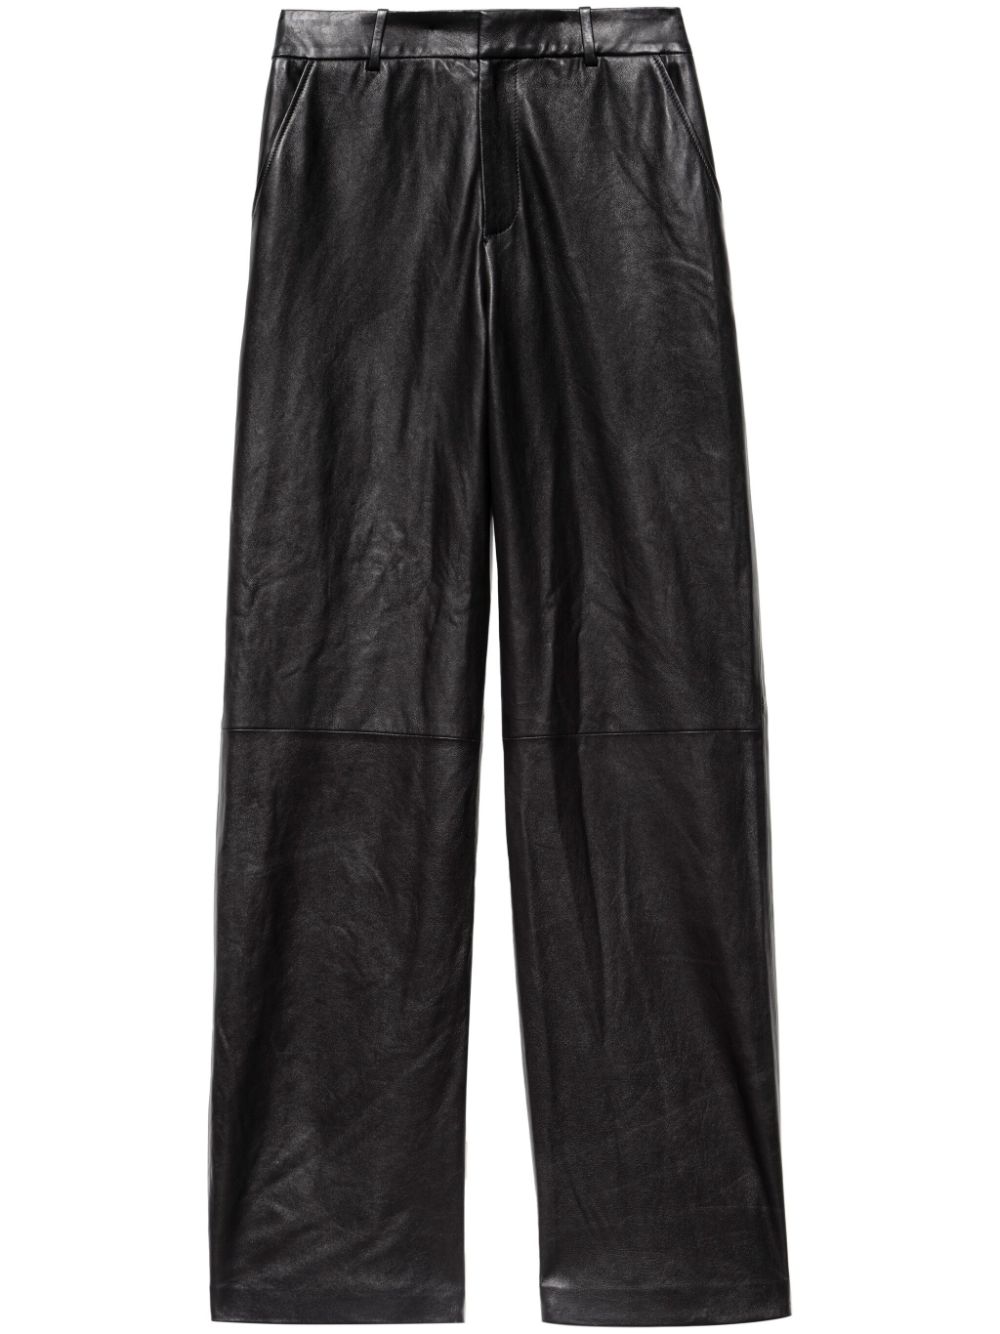 FRAME panelled leather high-waisted trousers - Black von FRAME